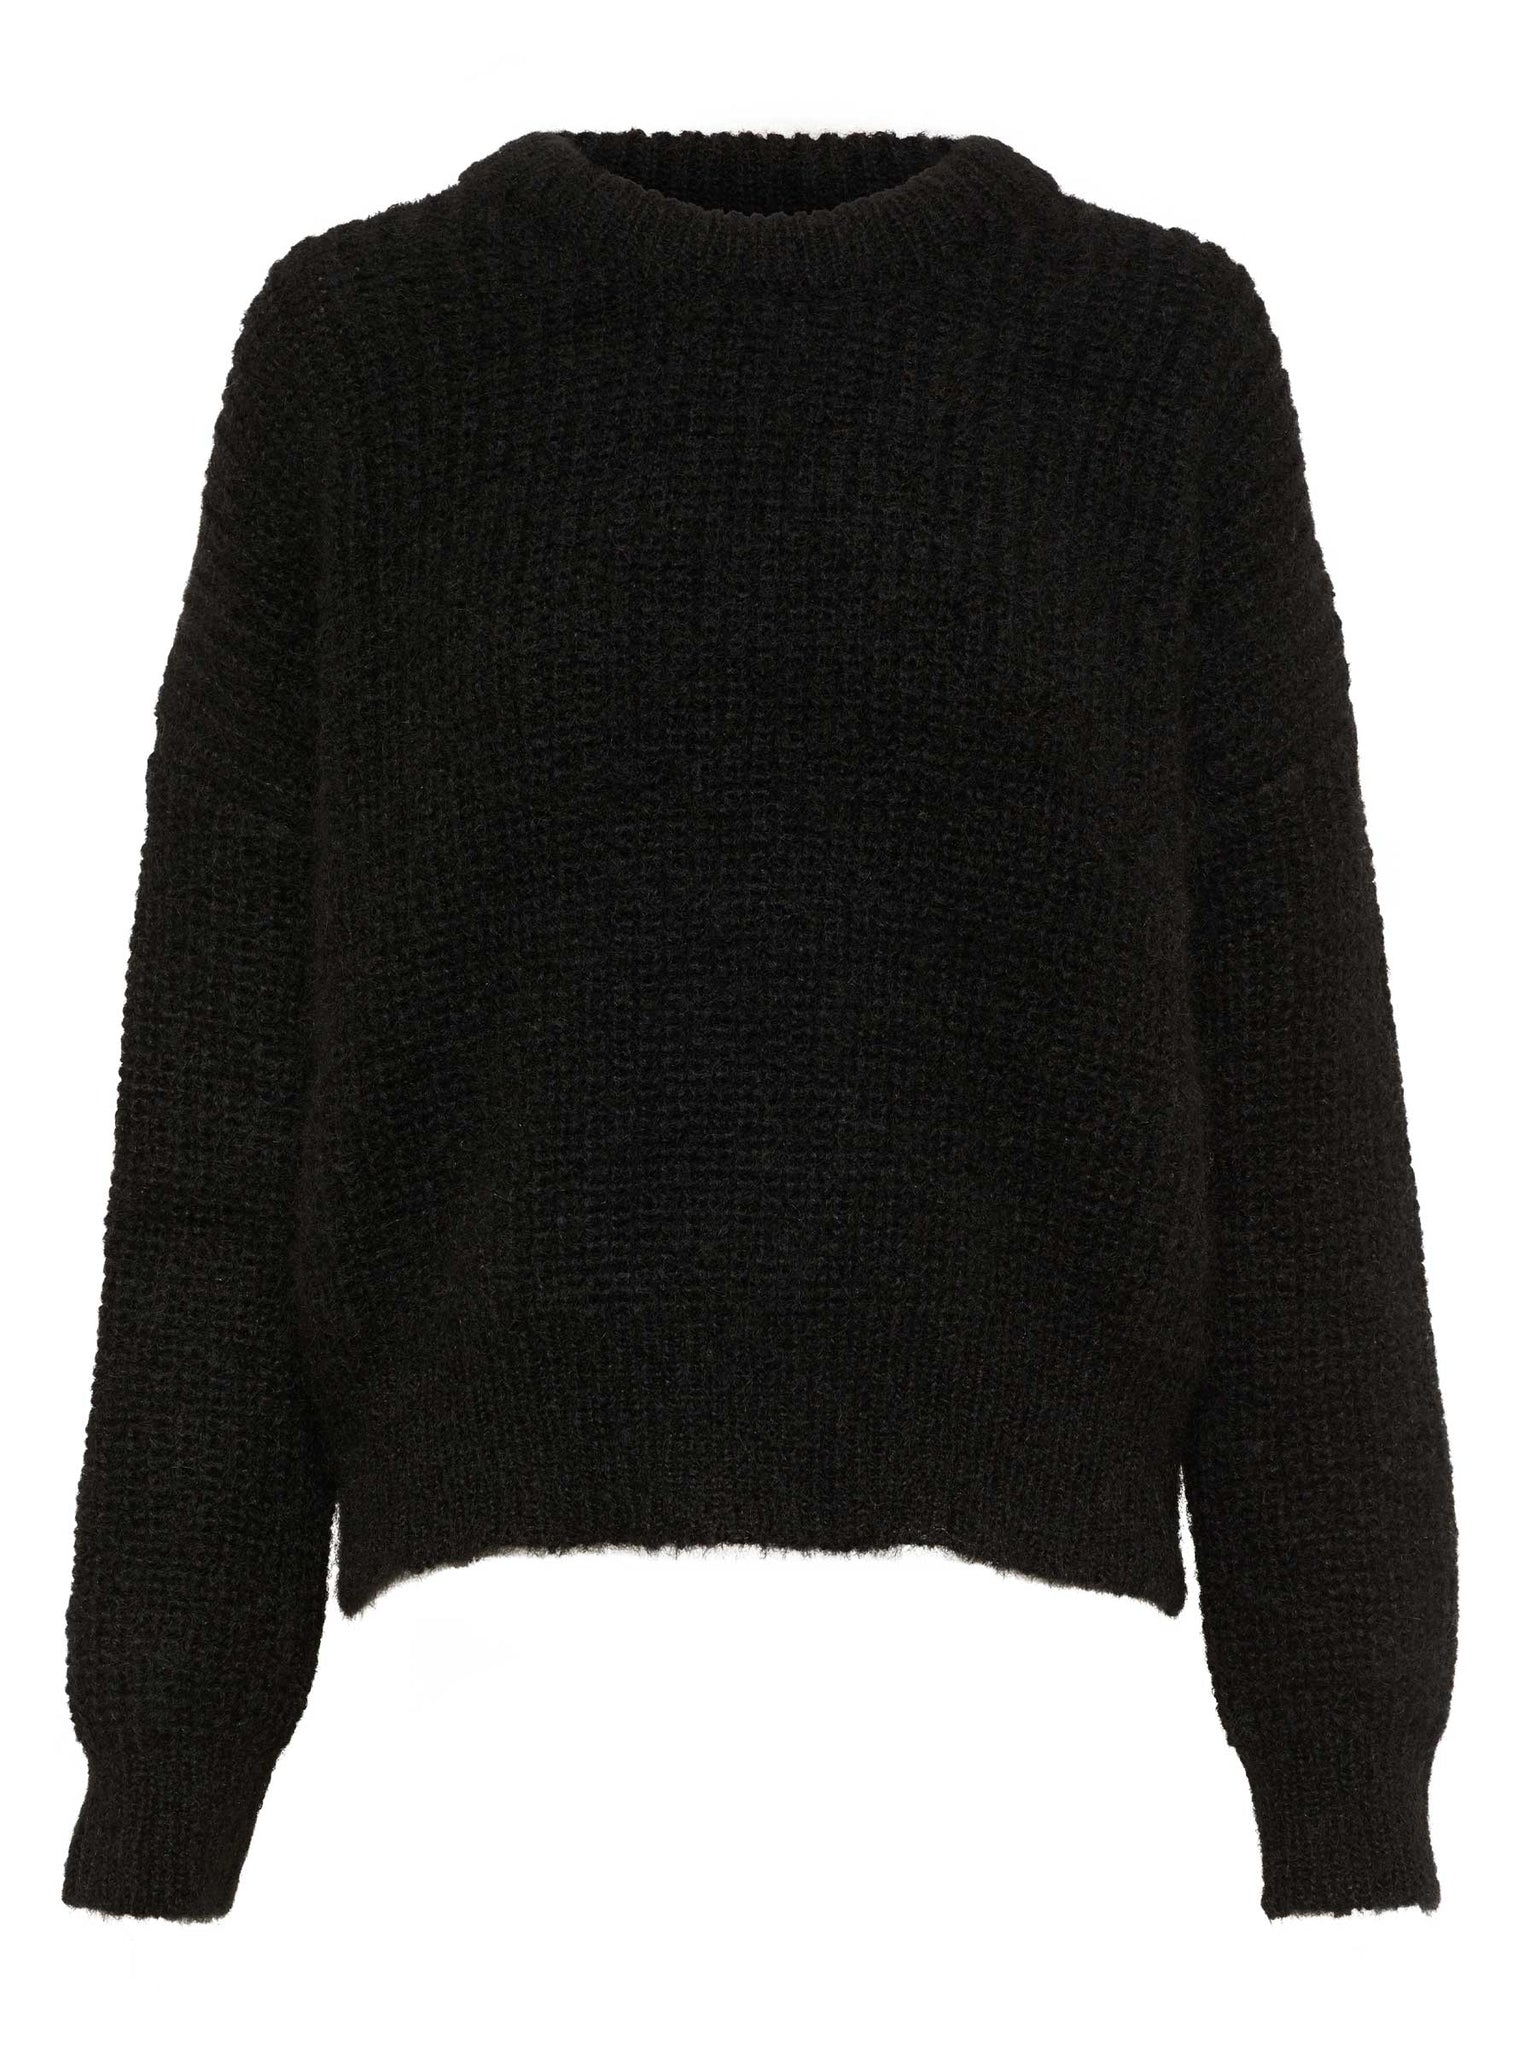 Marle | Bonnie Jumper in Black | The UNDONE by Marle